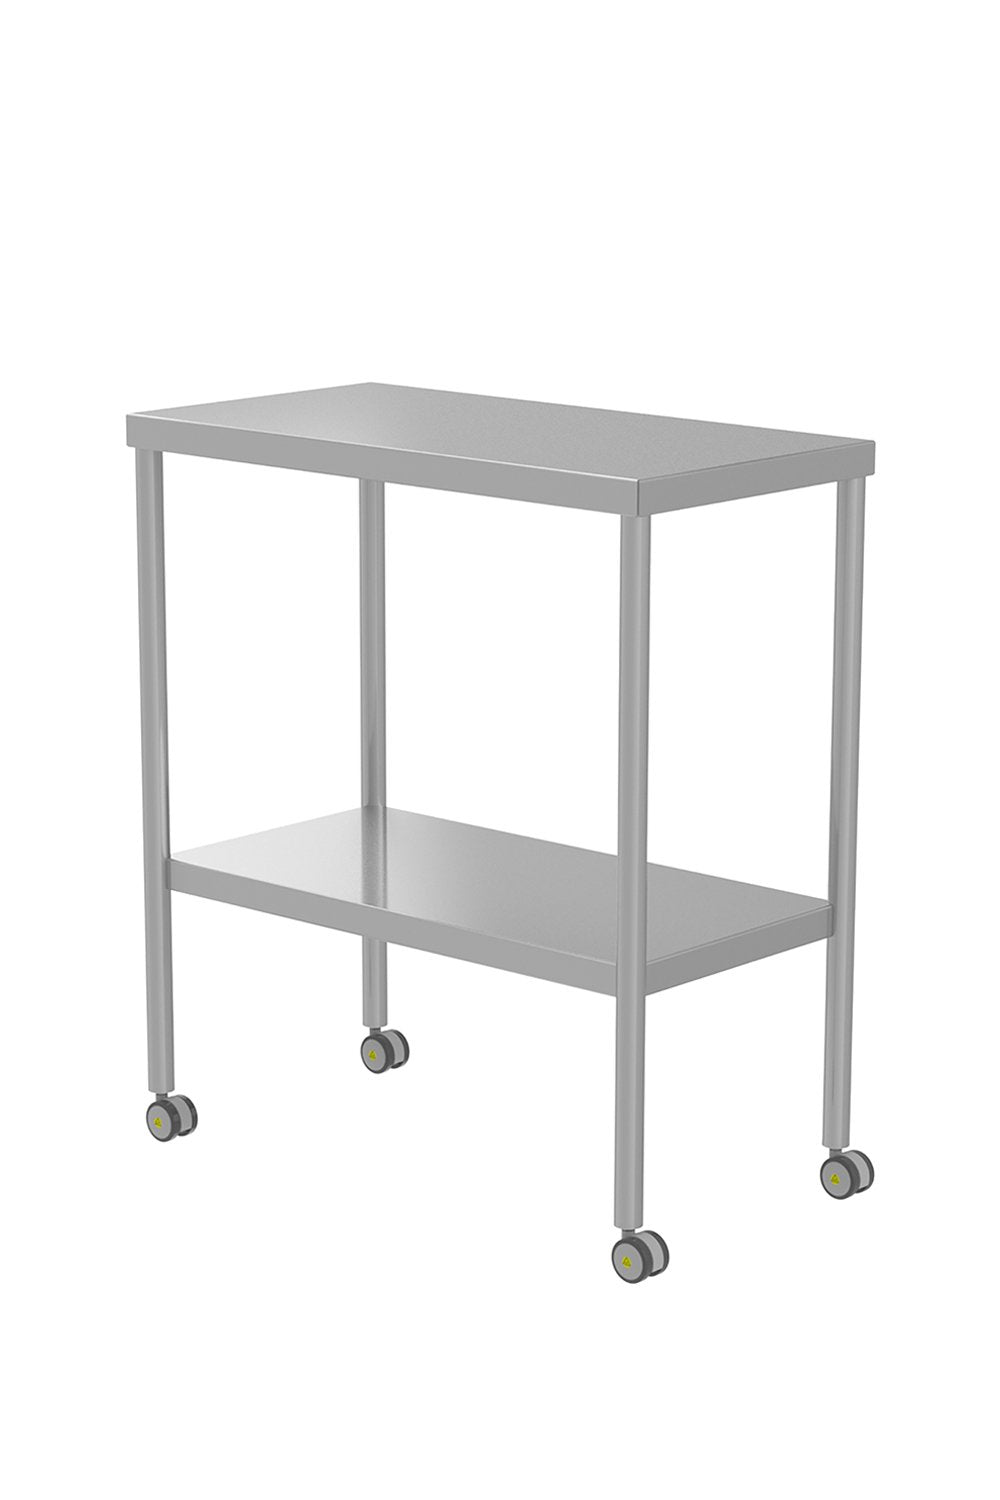 Stainless Steel Table Stainless Solutions Macmedical 